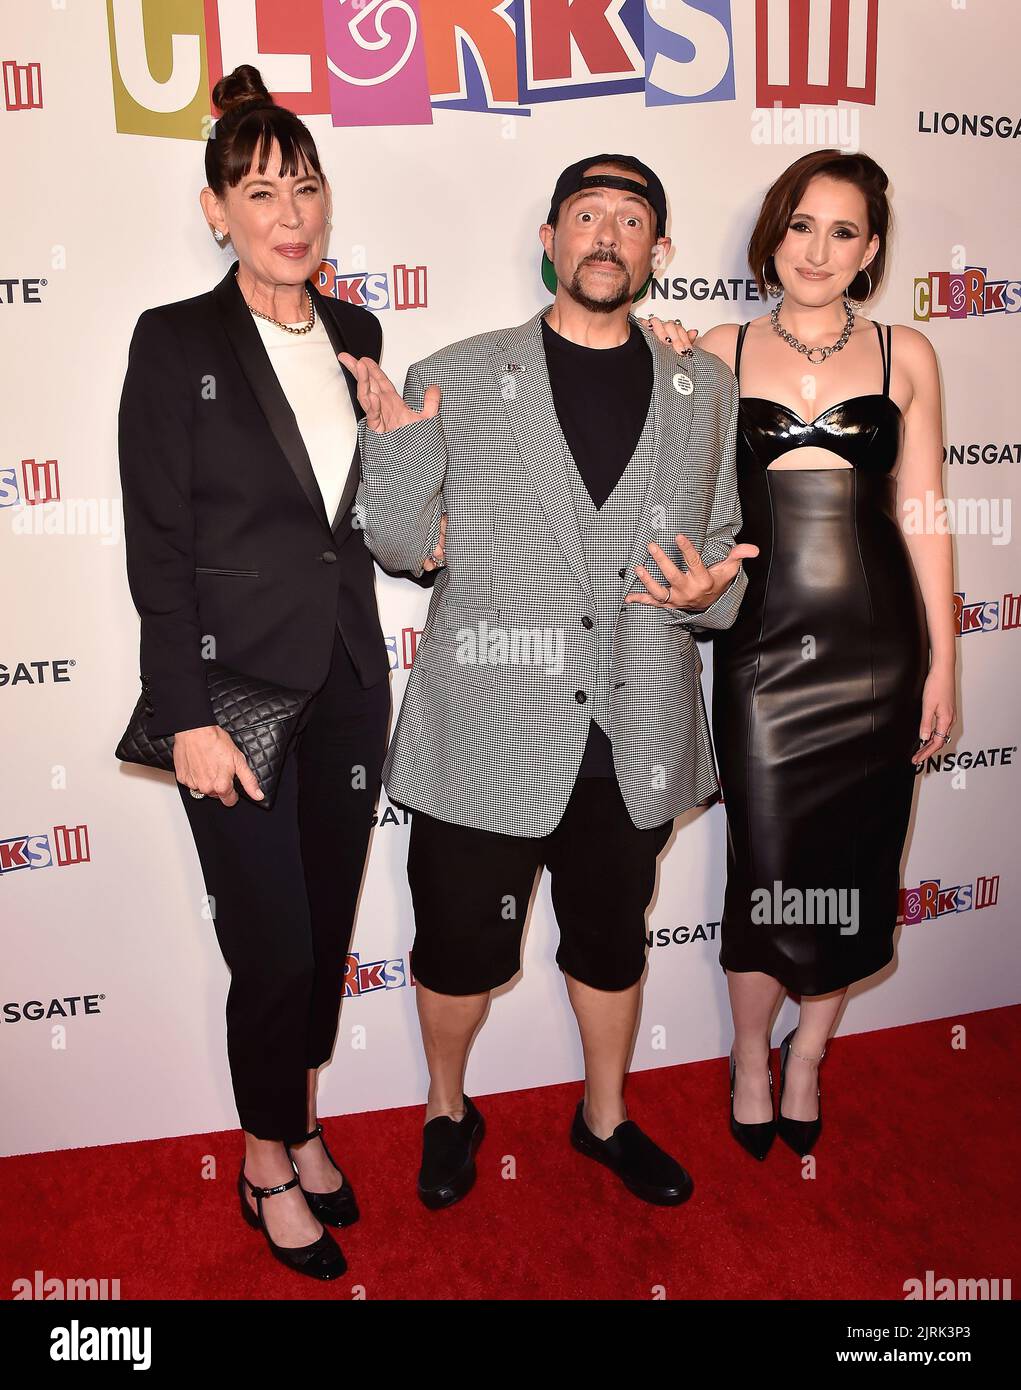 Los Angeles, USA. 24th Aug, 2022. Jennifer Schwalbach Smith, Kevin Smith and Harley Quinn Smith walking the red carpet at the Los Angeles premiere of 'Clerks III' at TCL Chinese 6 Theatres in Los Angeles, CA on August 24, 2022. (Photo By Scott Kirkland/Sipa USA) Credit: Sipa USA/Alamy Live News Stock Photo